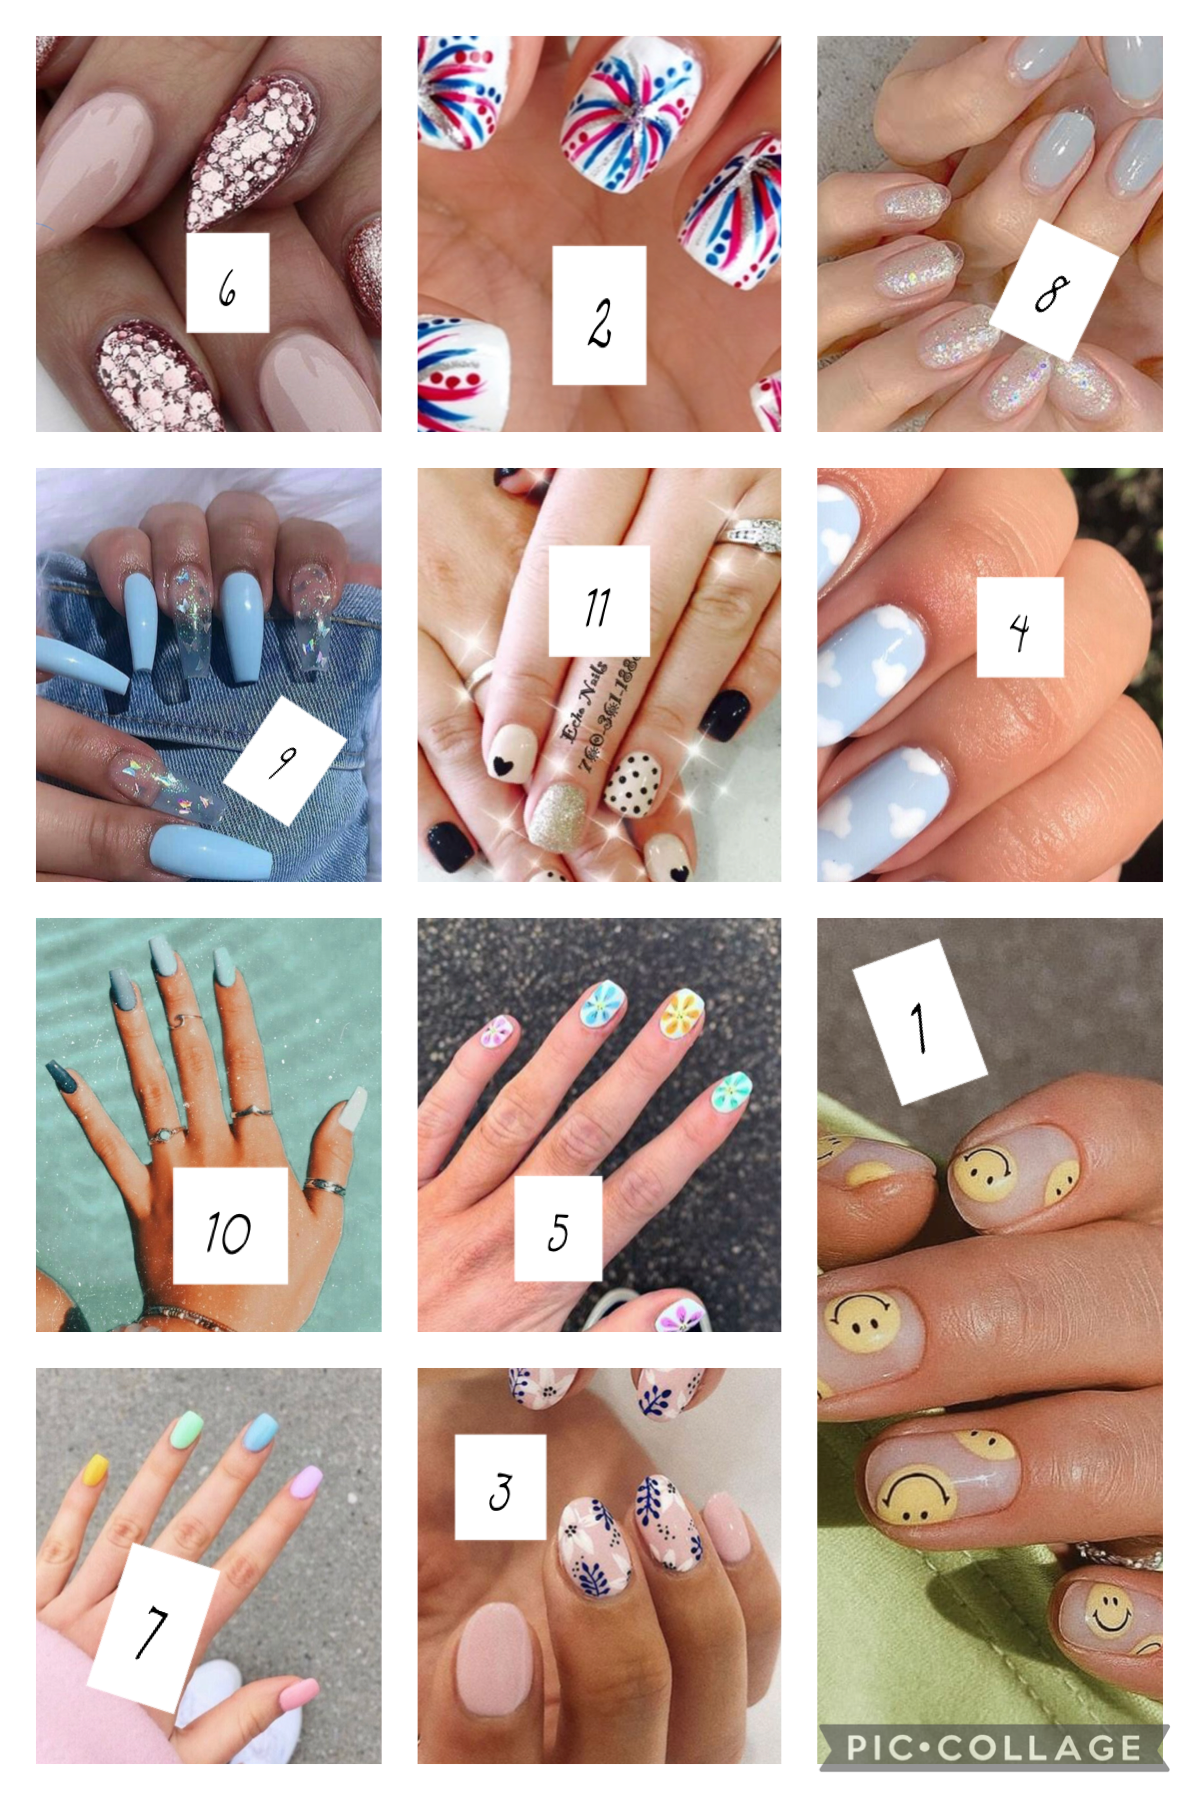 Let me know what is your fav nail design.
My fav nail design is 2 and 10 